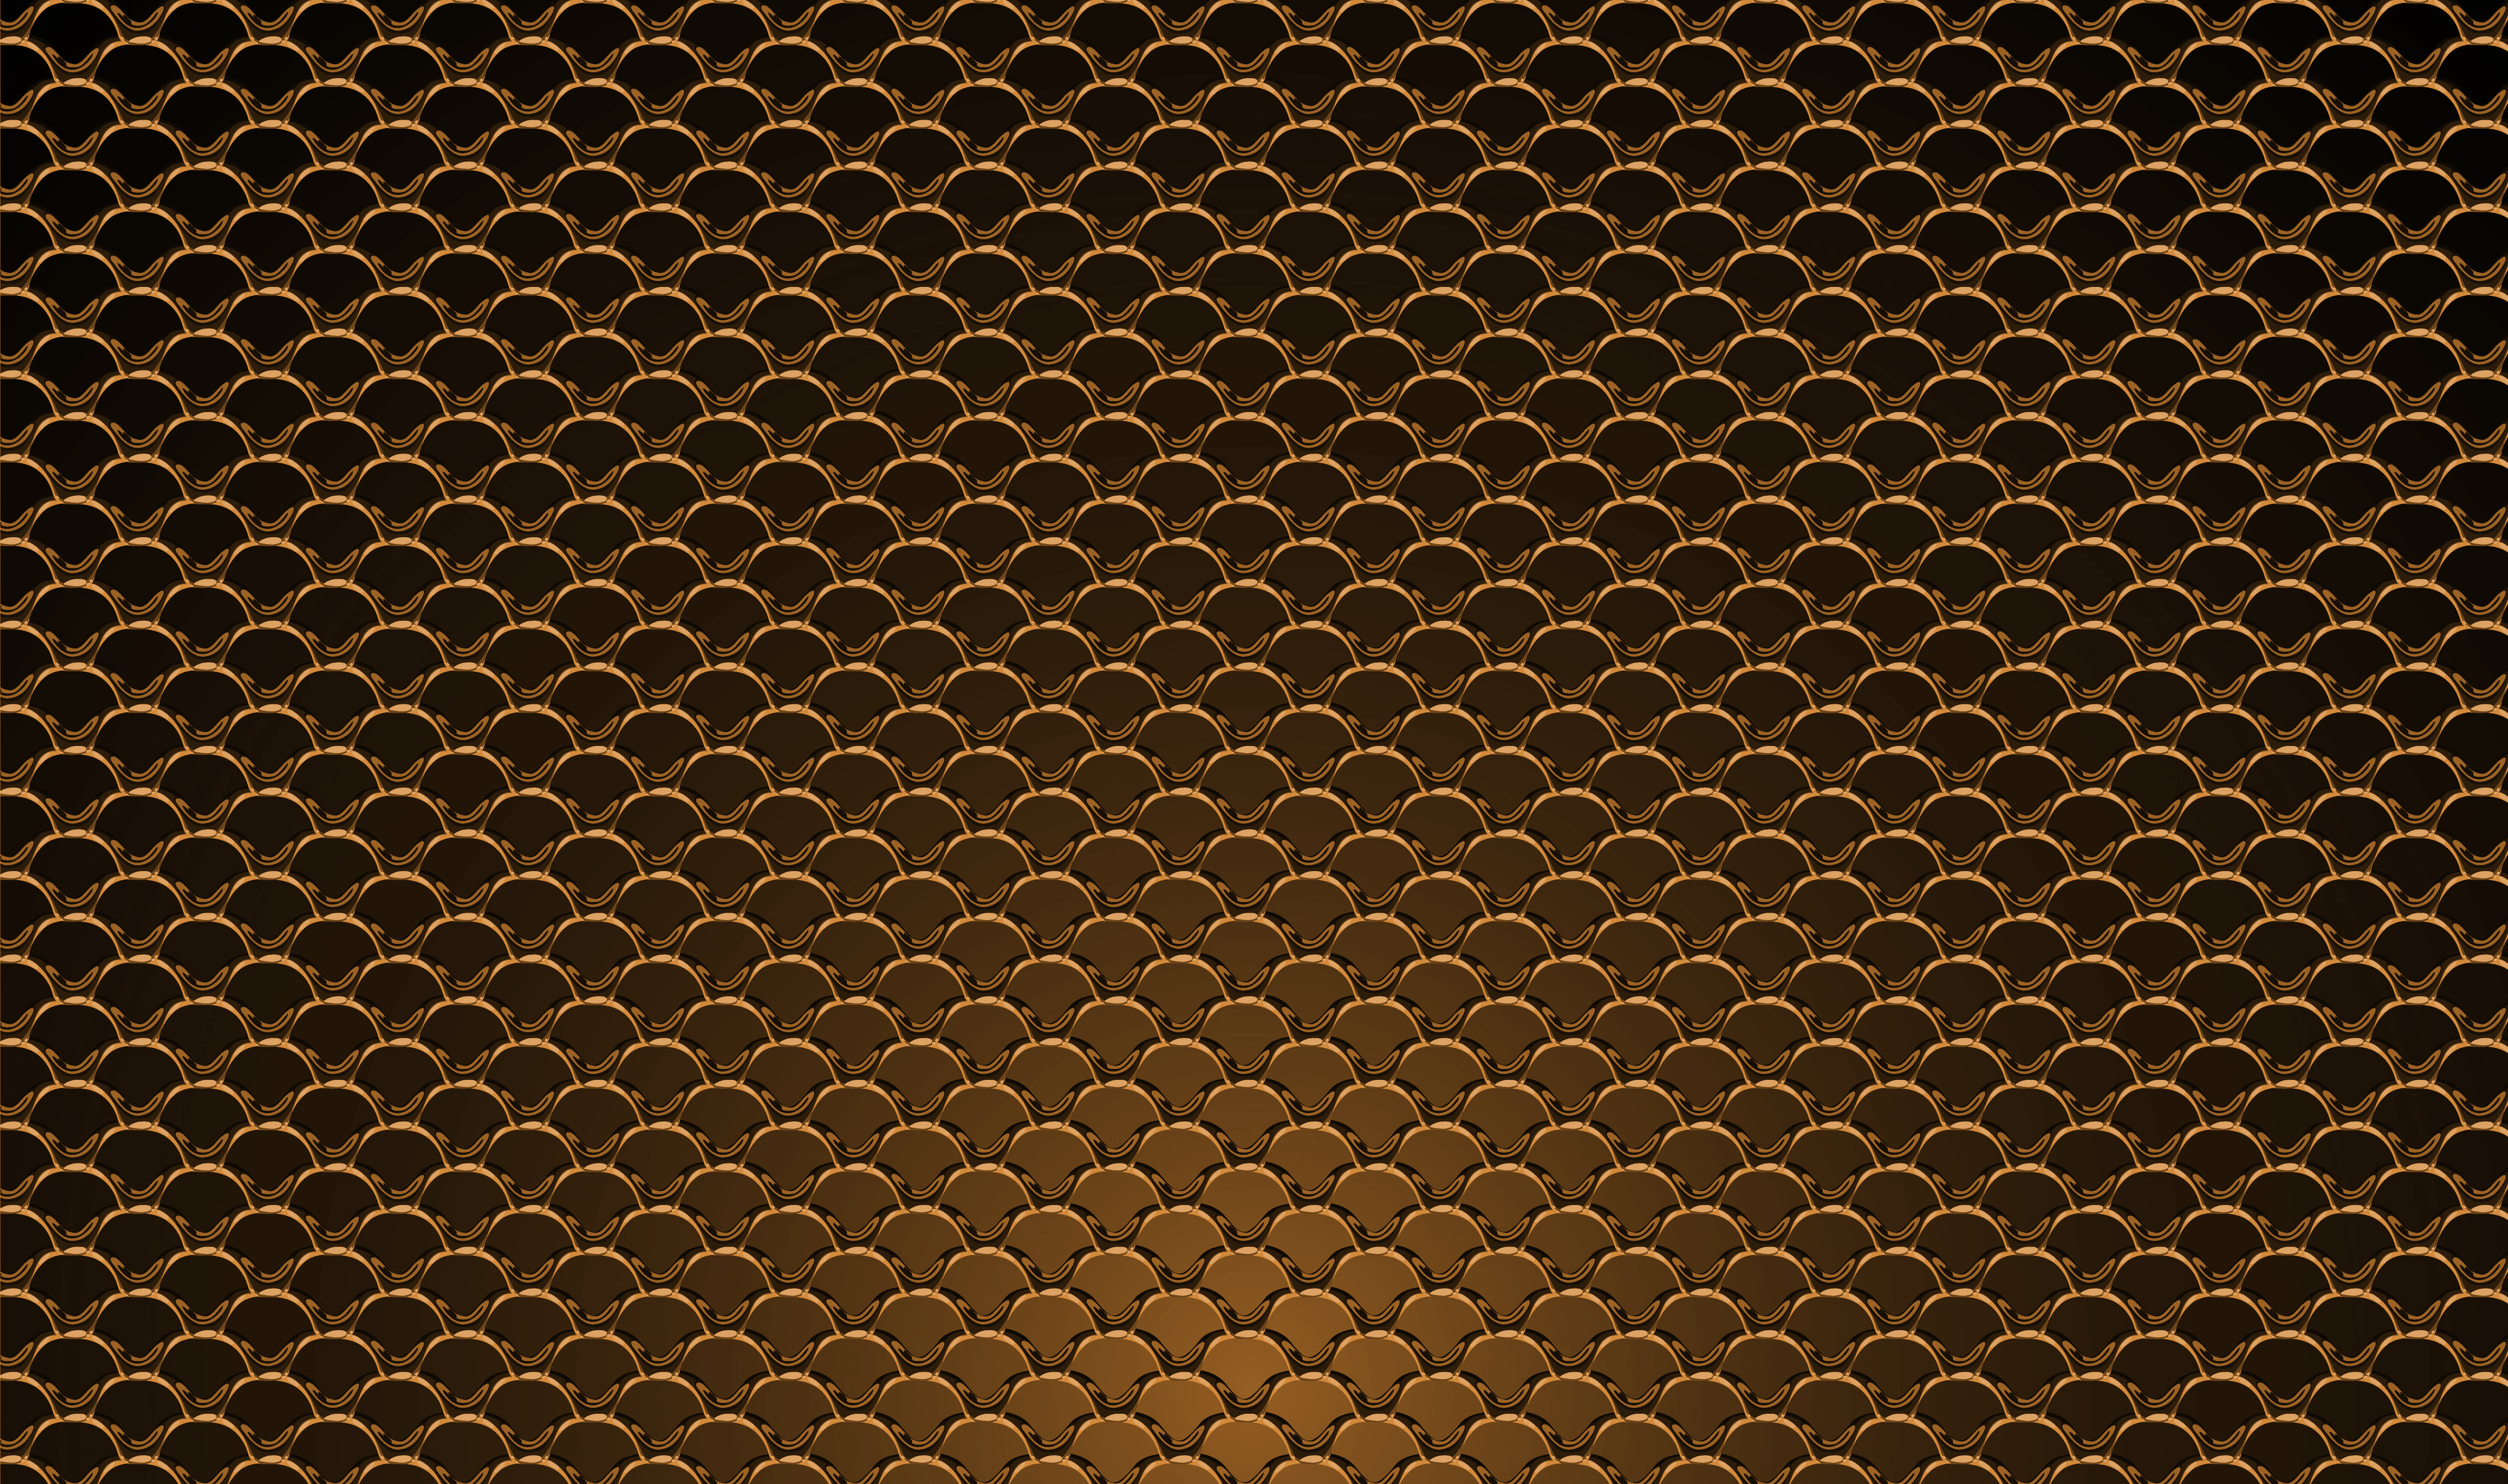 perforated copper